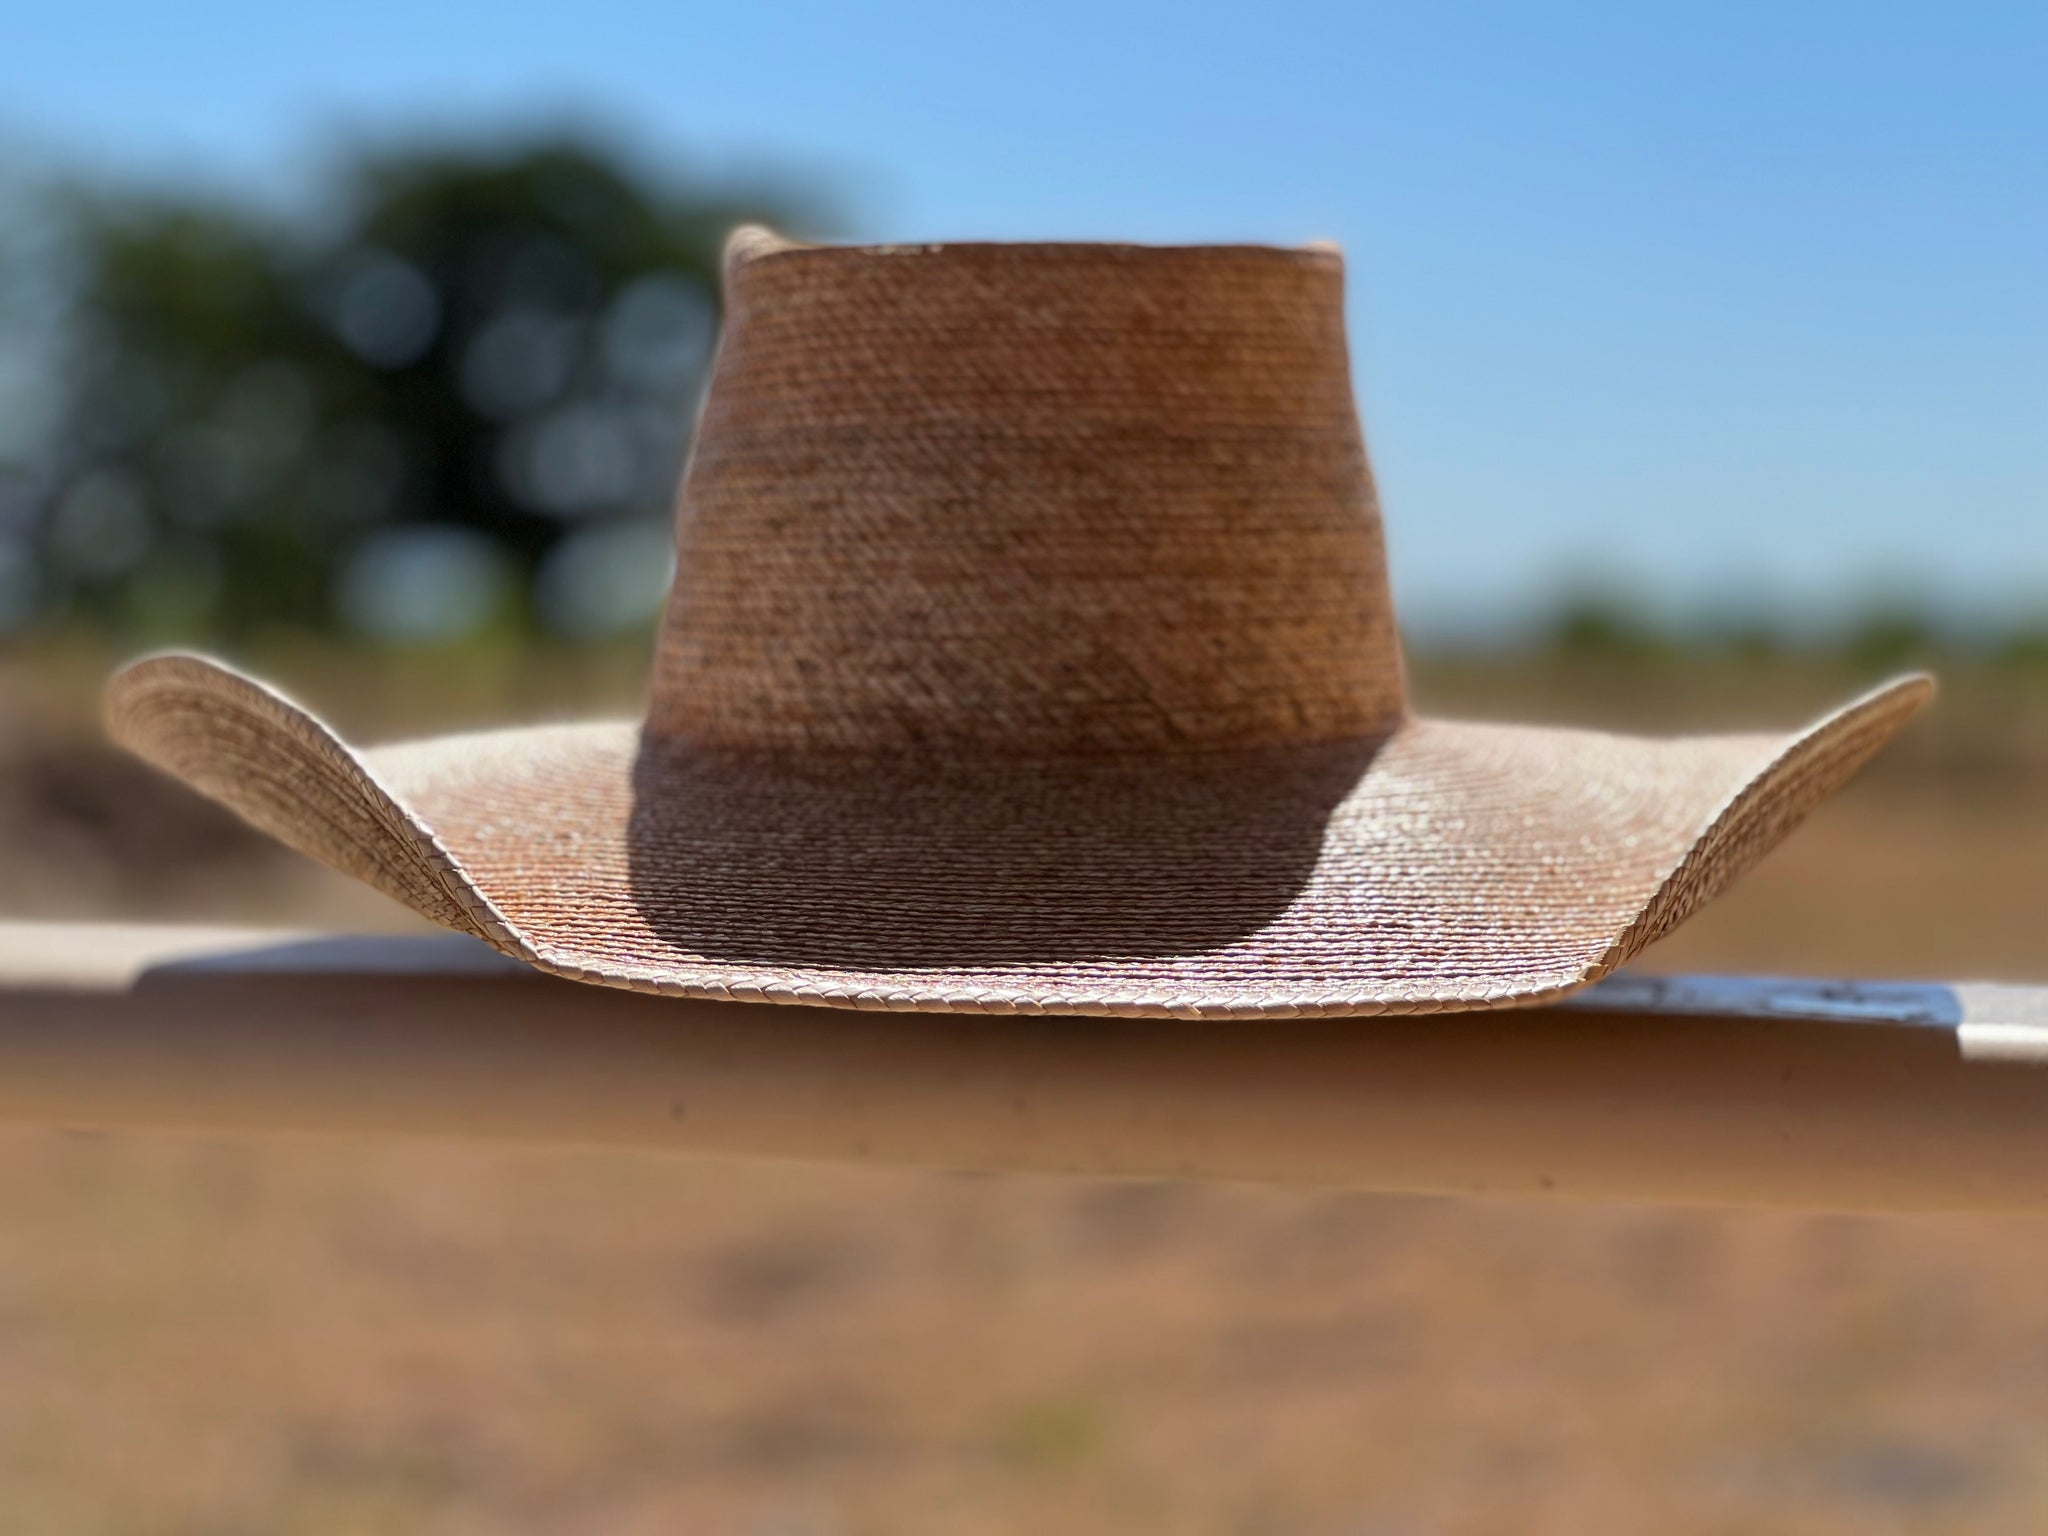 Jaxonbilt_Hats_are_Australian_made_palm_leaf_hats_and_crossbred_hats_for_cowgirls_and_cowboys_with_wide_brims_for_sun_protection_5”_brim_trim_on_edge_wide_crown_band_standard_brim_shape_5”_brim_dark_oak_palm